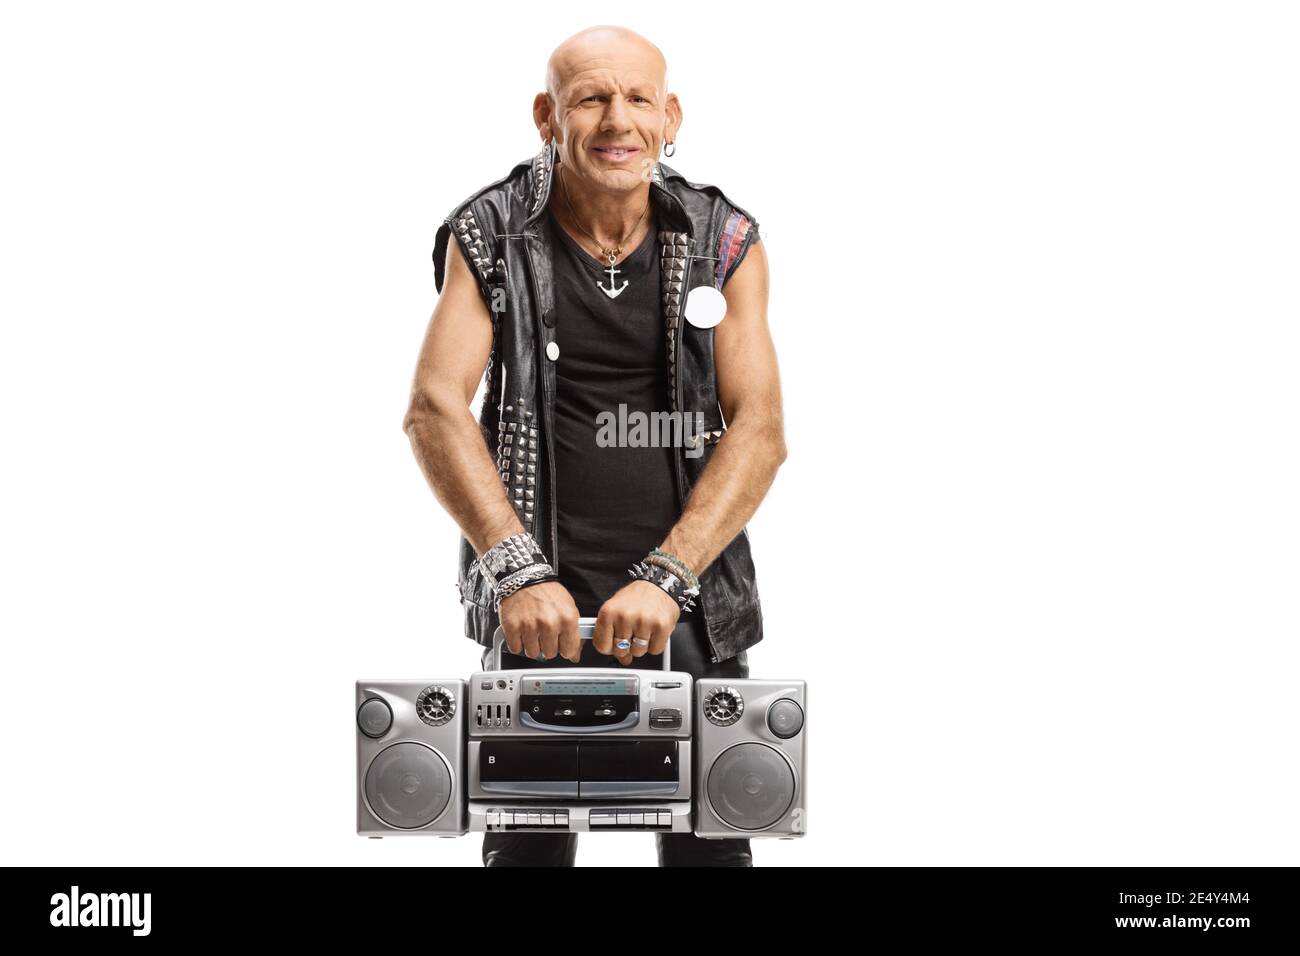 Punk rocker in leather outfit holding a boombox radio isolated on white  background Stock Photo - Alamy